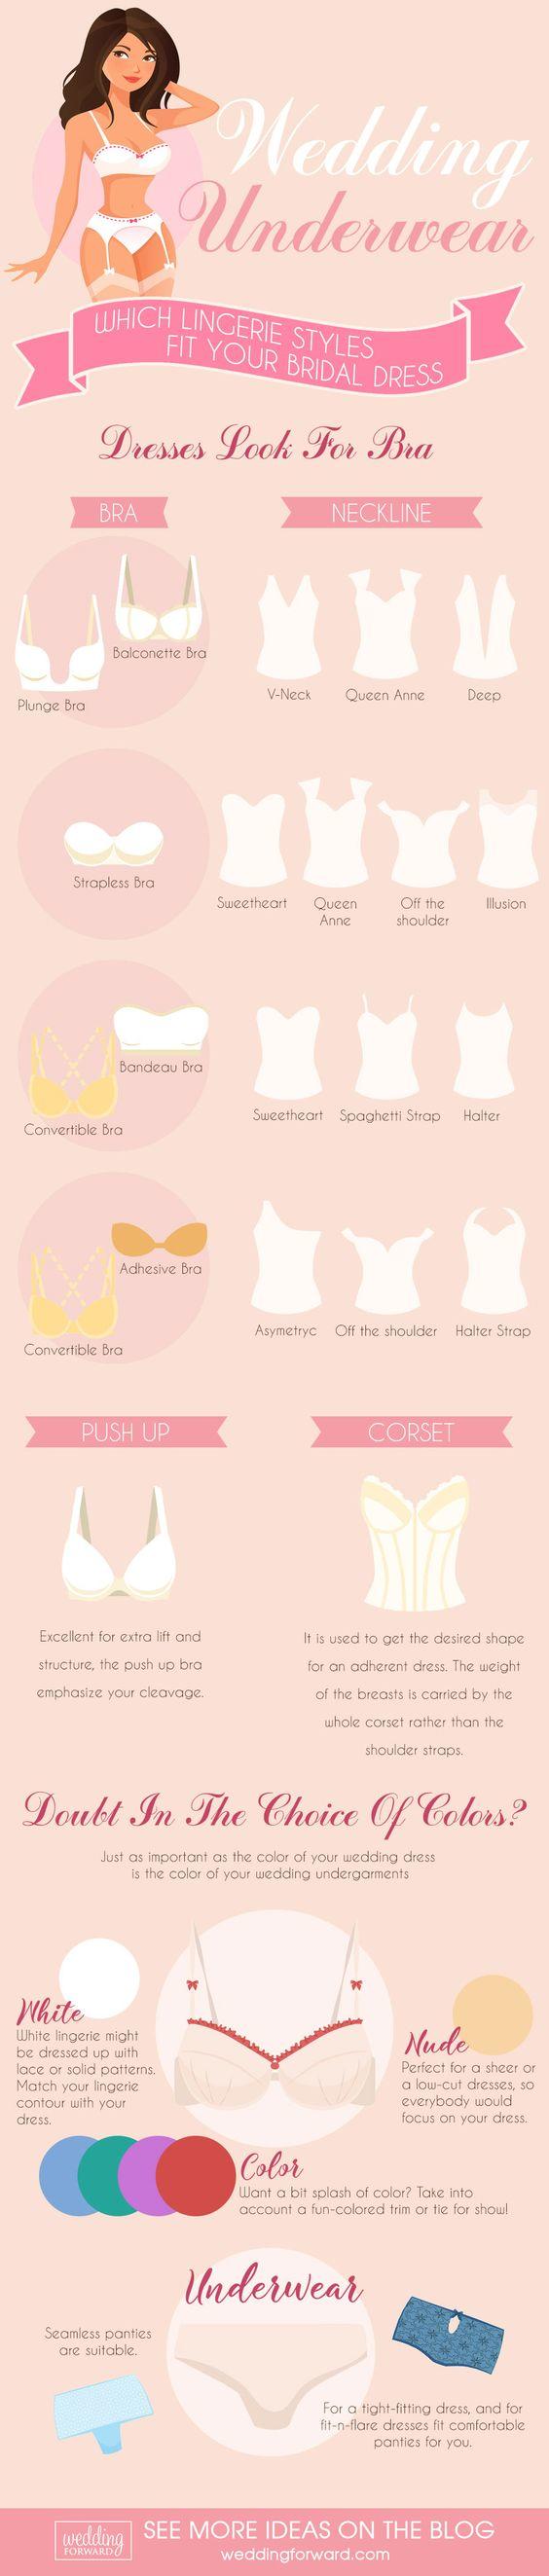 what to wear under wedding dress guide shopping infographic